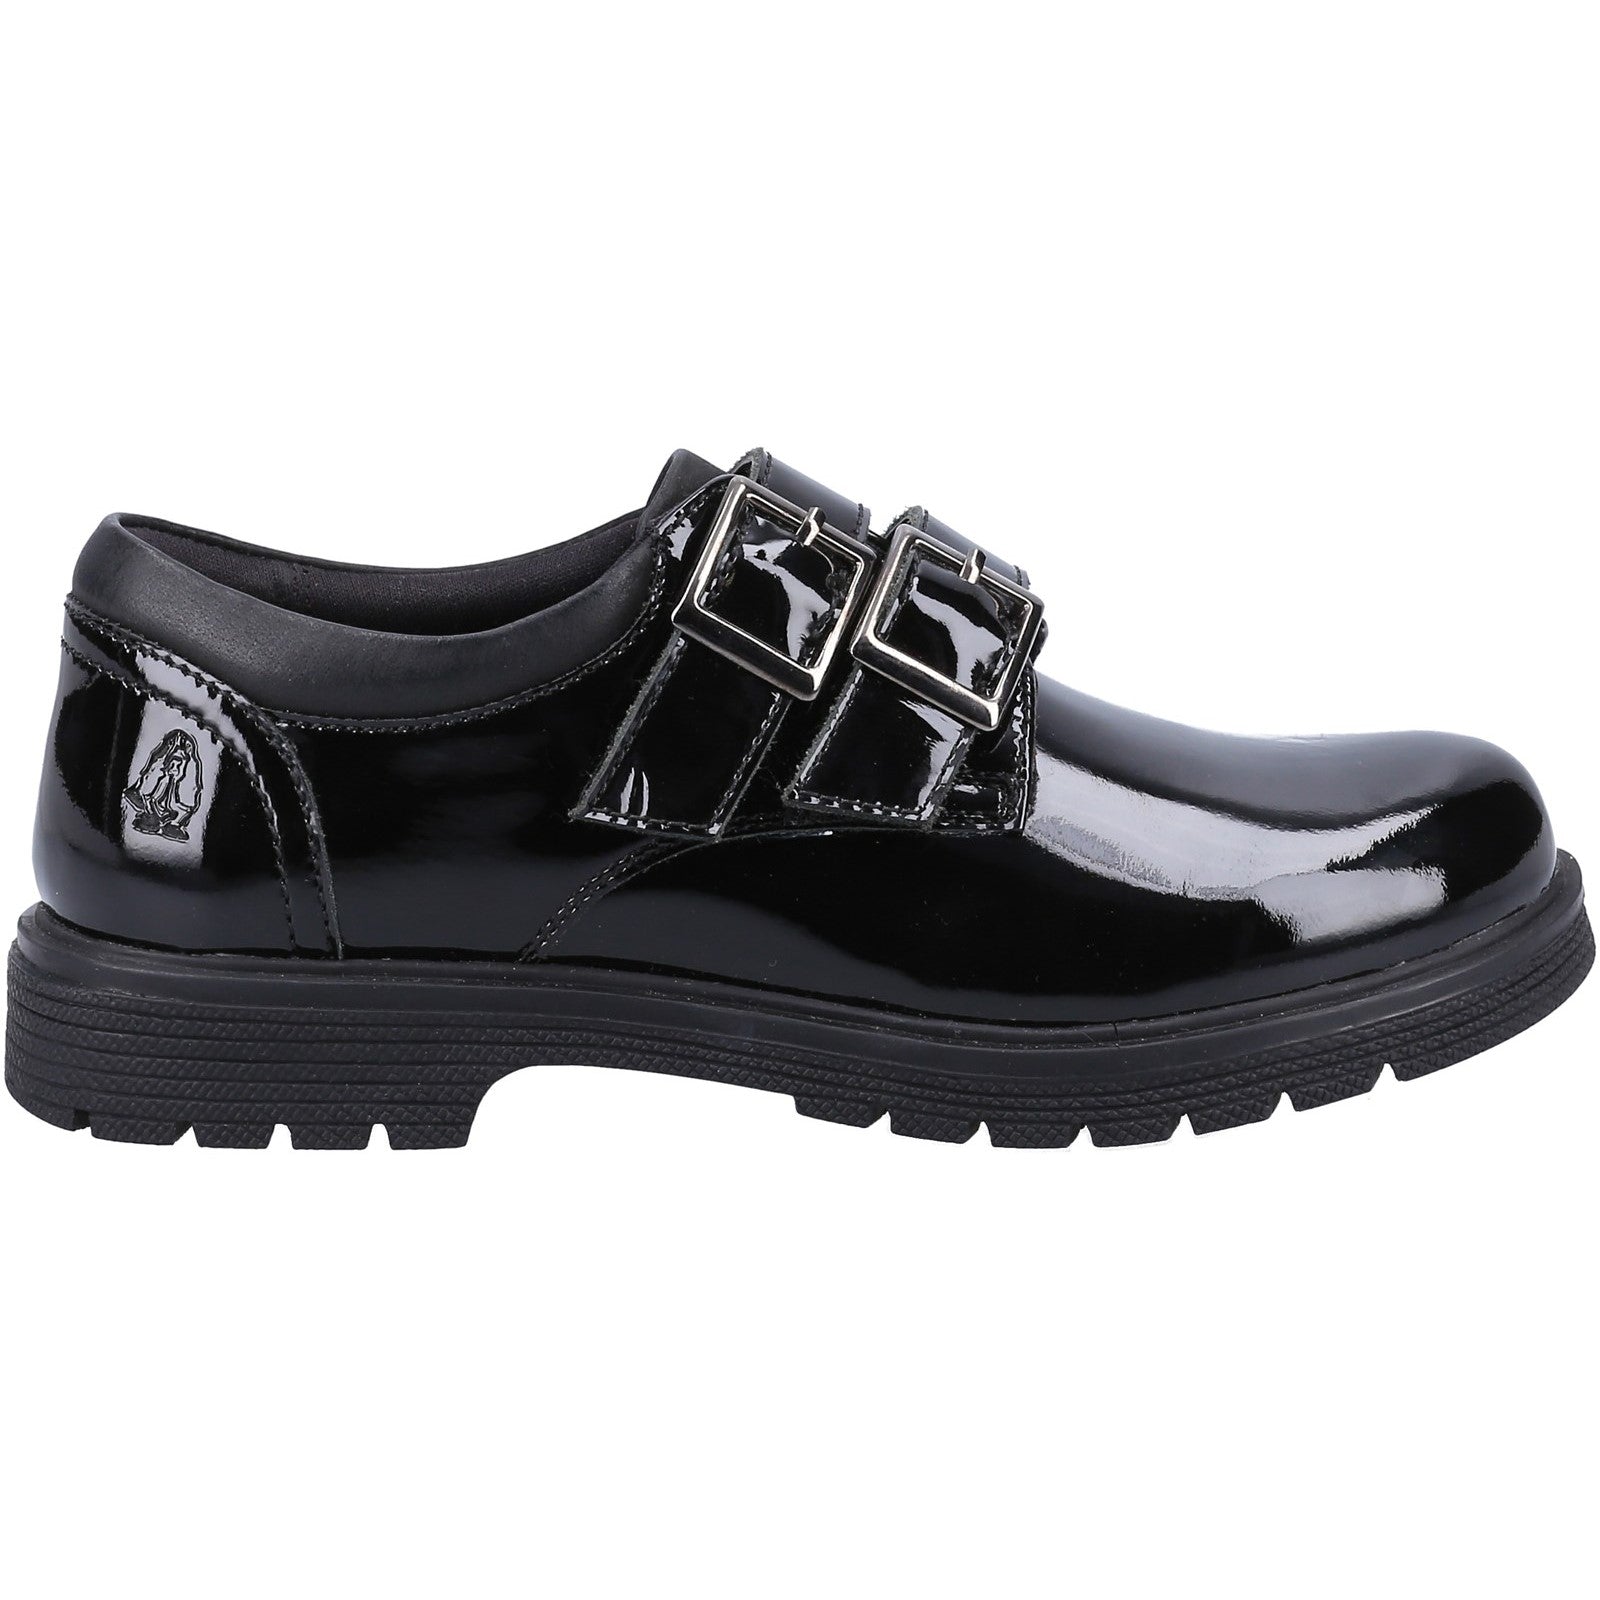 Hush Puppies Girls Sunny Patent Leather School Shoes - Black